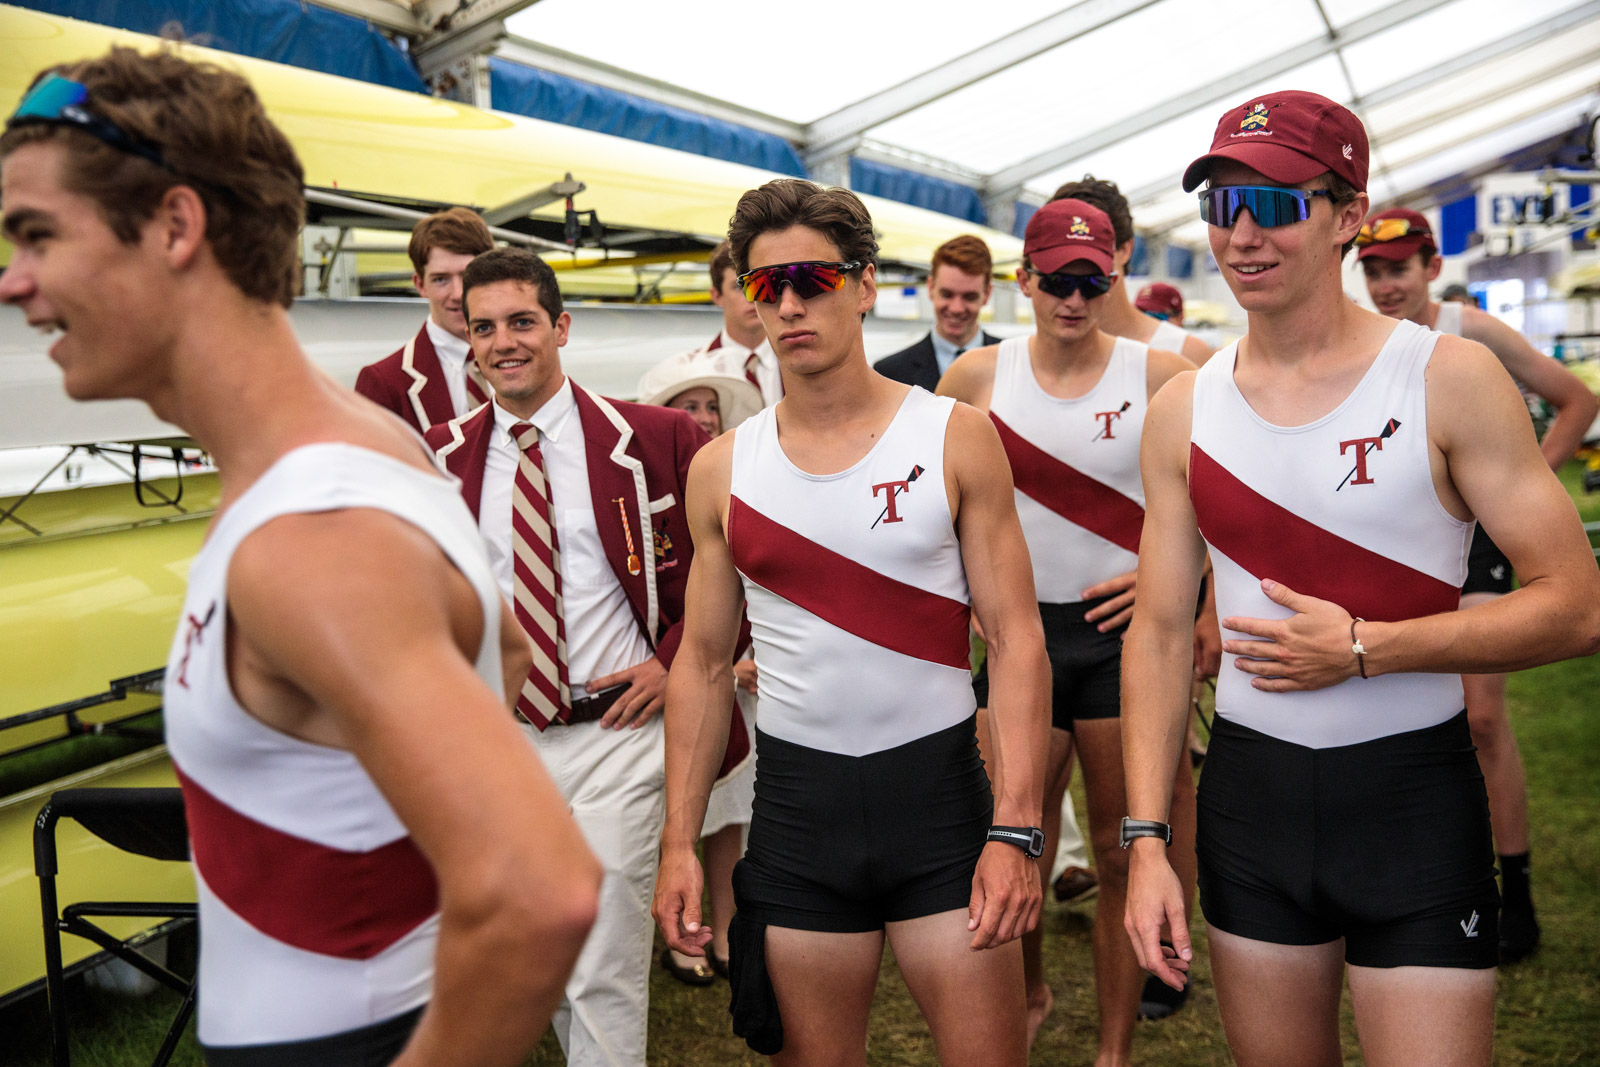  A crew gather around the rowing boats following a race at the Henley Royal Regatta on June 28, 2017 in Henley-on-Thames. 